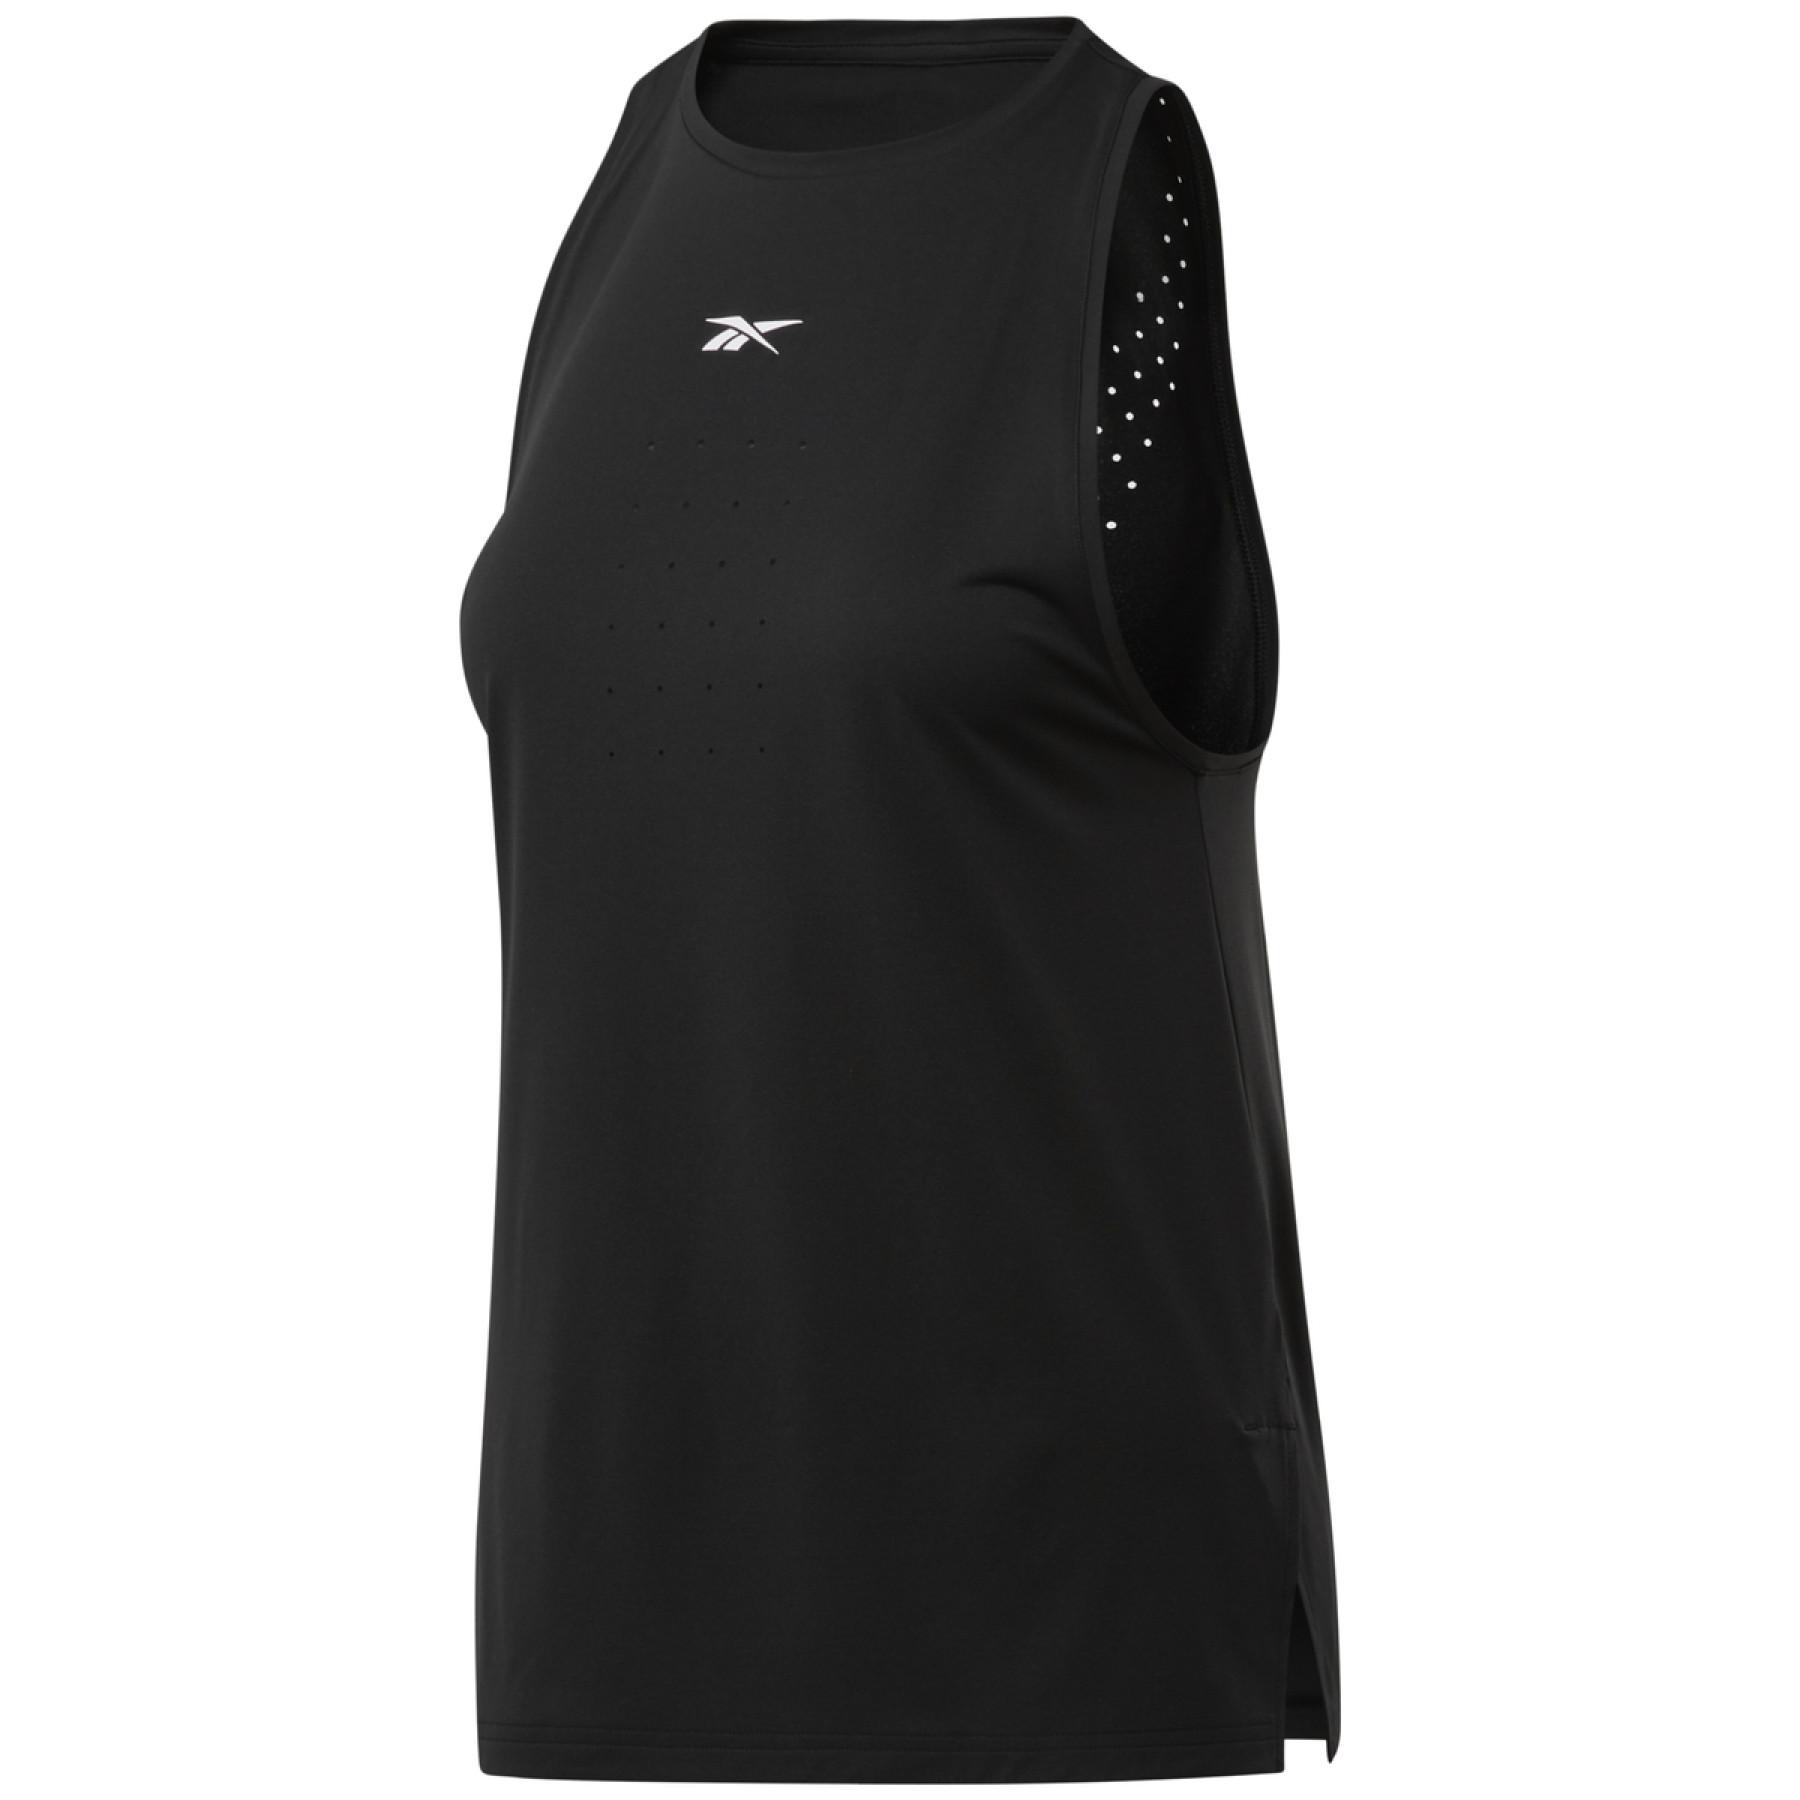 Damski tank top Reebok United By Fitness Perforated